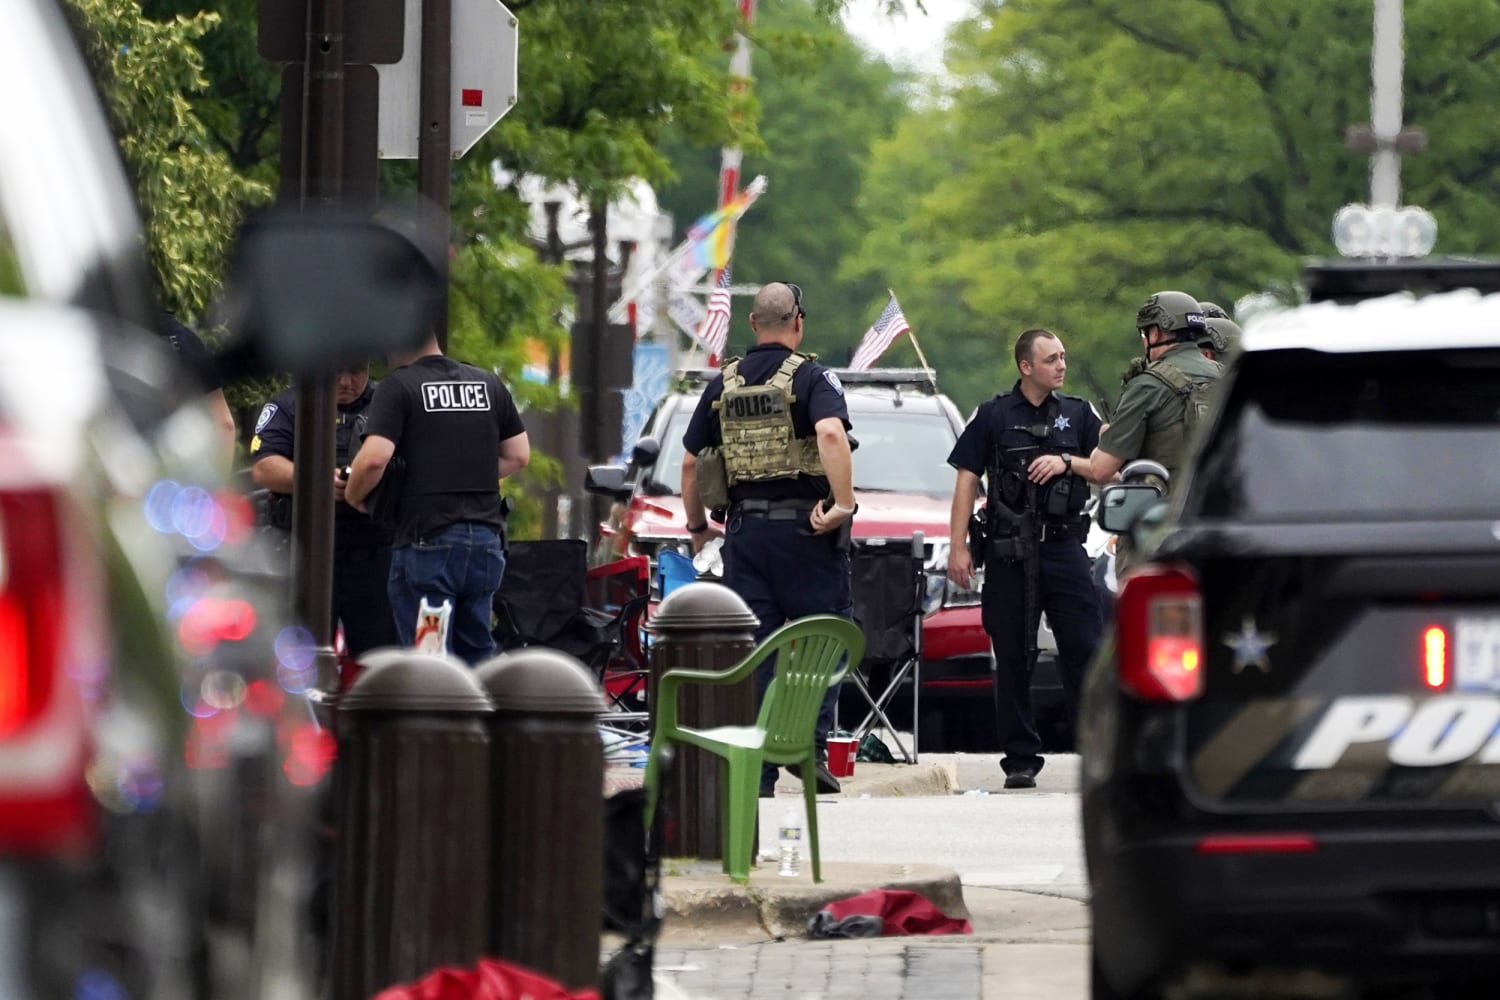 At least 6 dead, 24 injured after shooting at Highland Park, Illinois, July Fourth parade